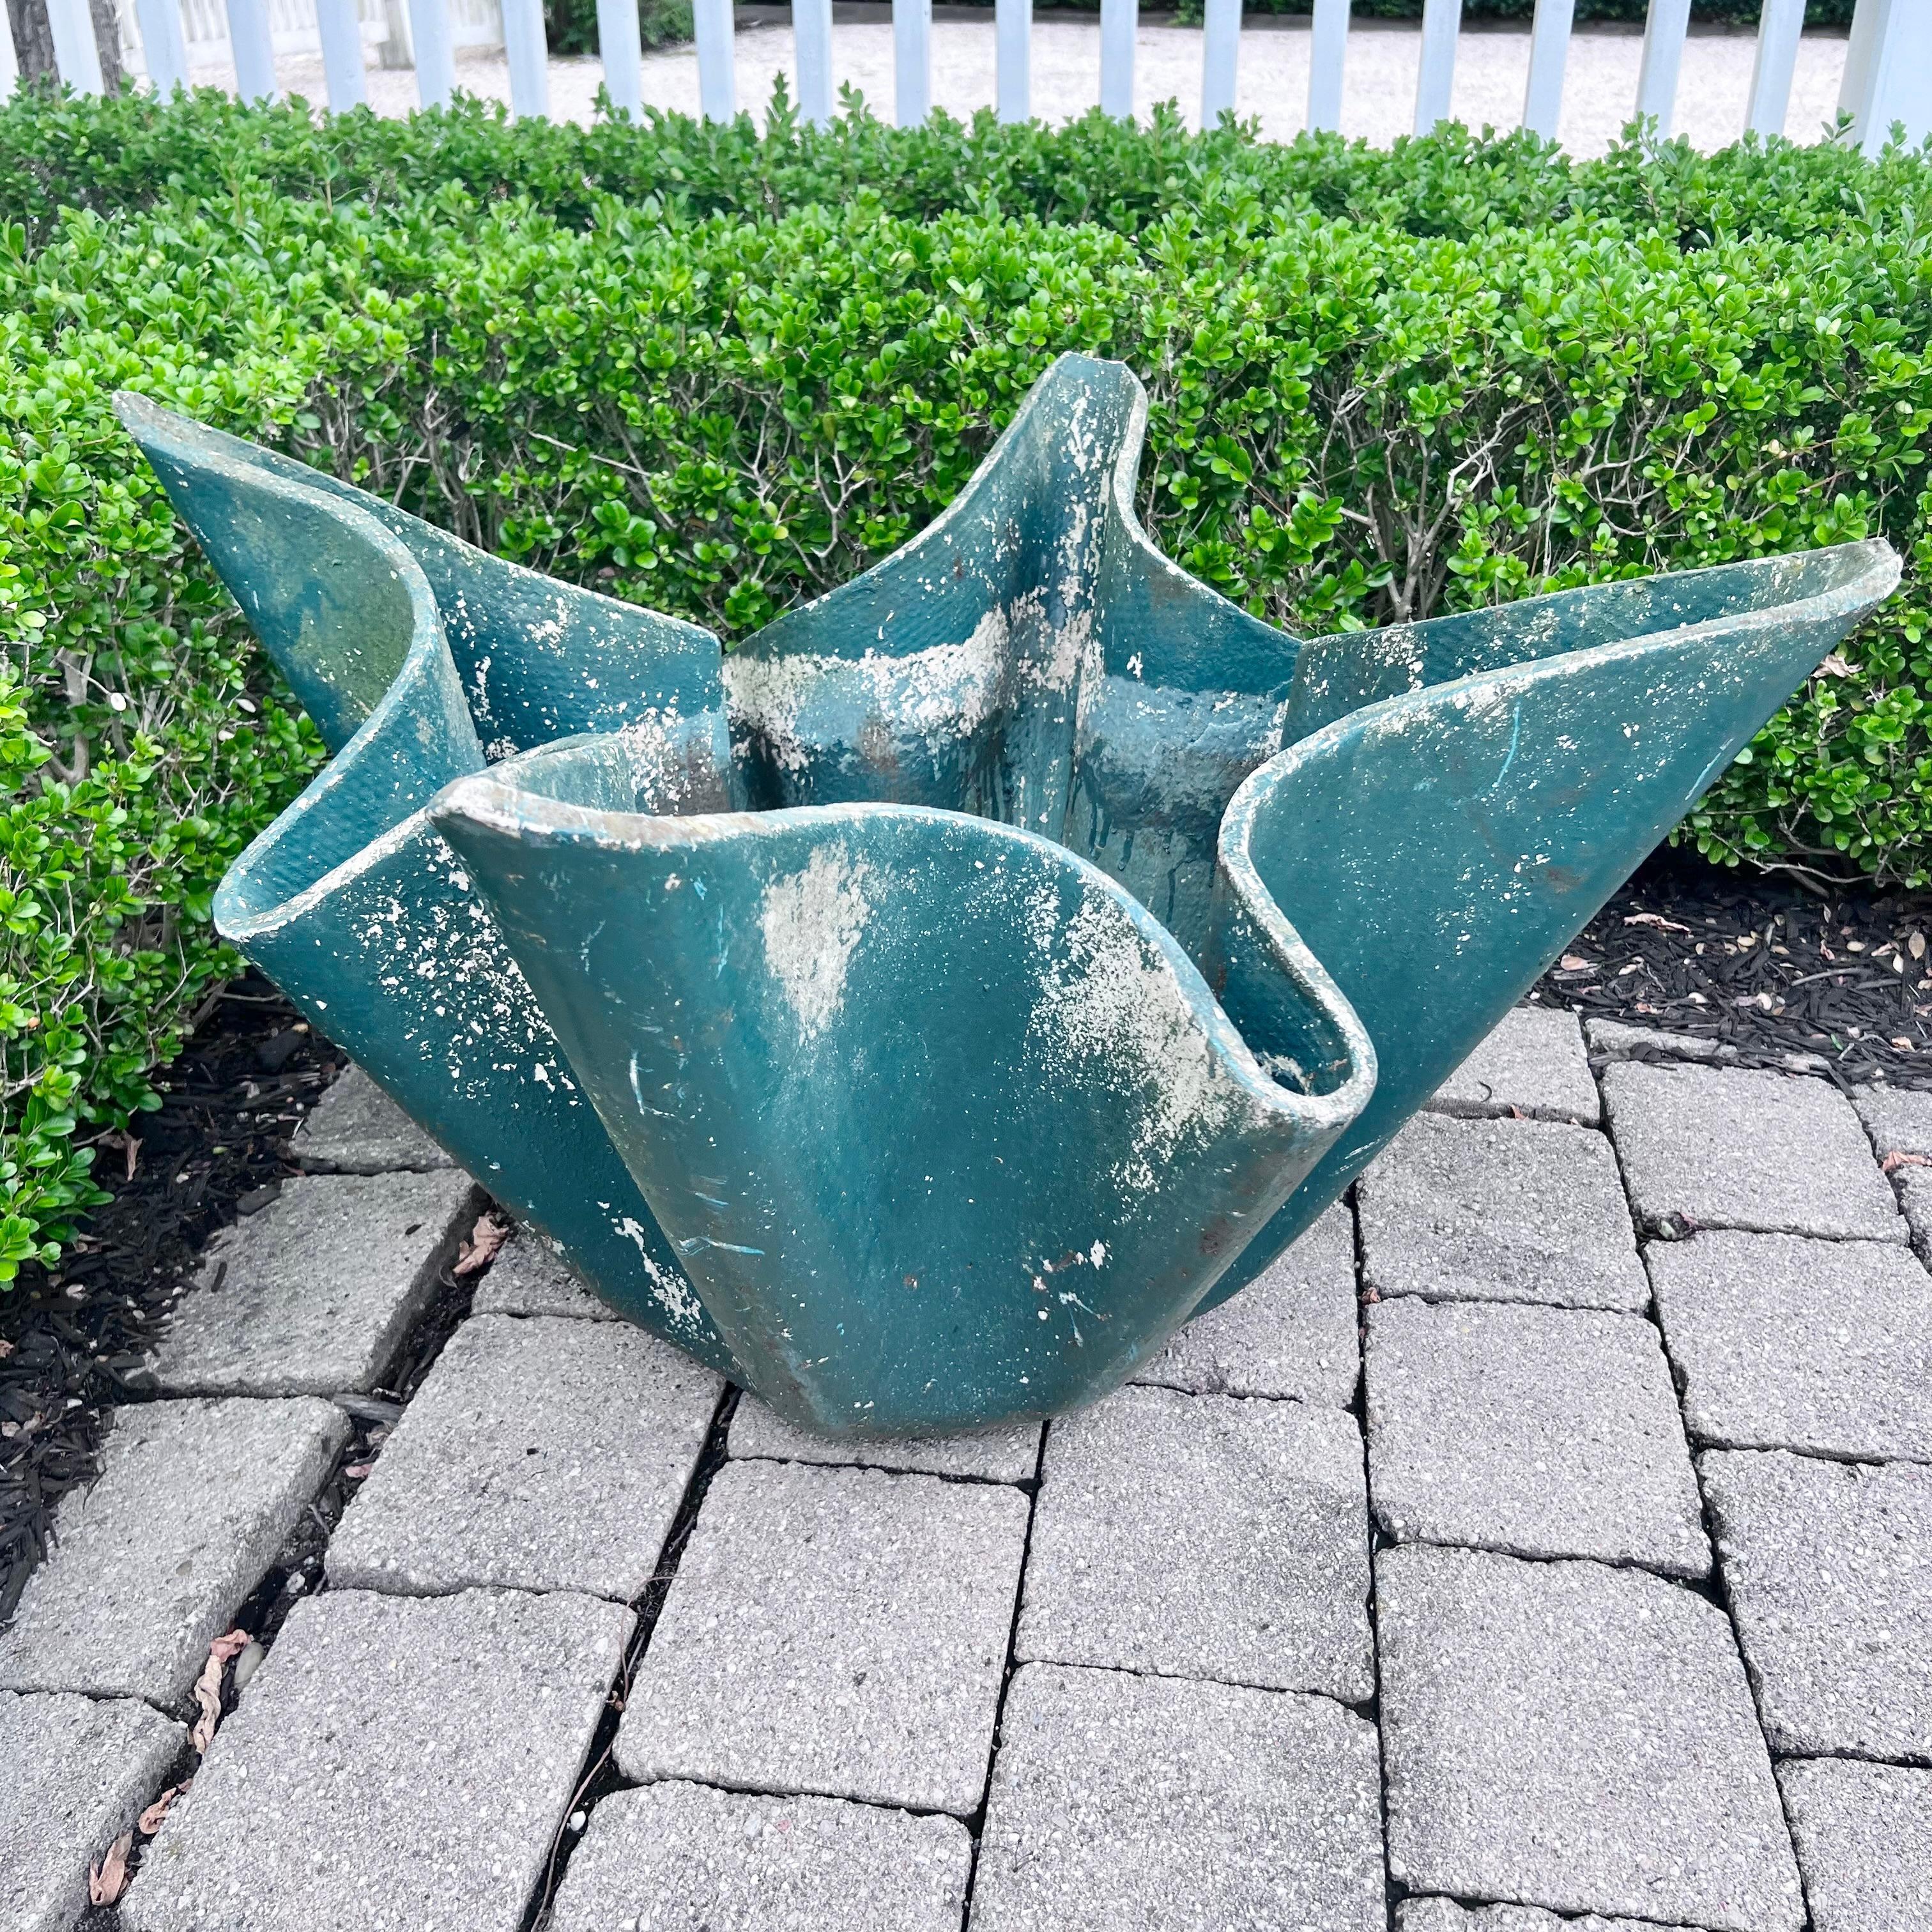 Stunning concrete planter by Swiss architect Willy Guhl. An iteration of his iconic handkerchief planter but as opposed to the traditional low profile handkerchief with wide leaf-like arms, this planter comes with massive prongs standing erect